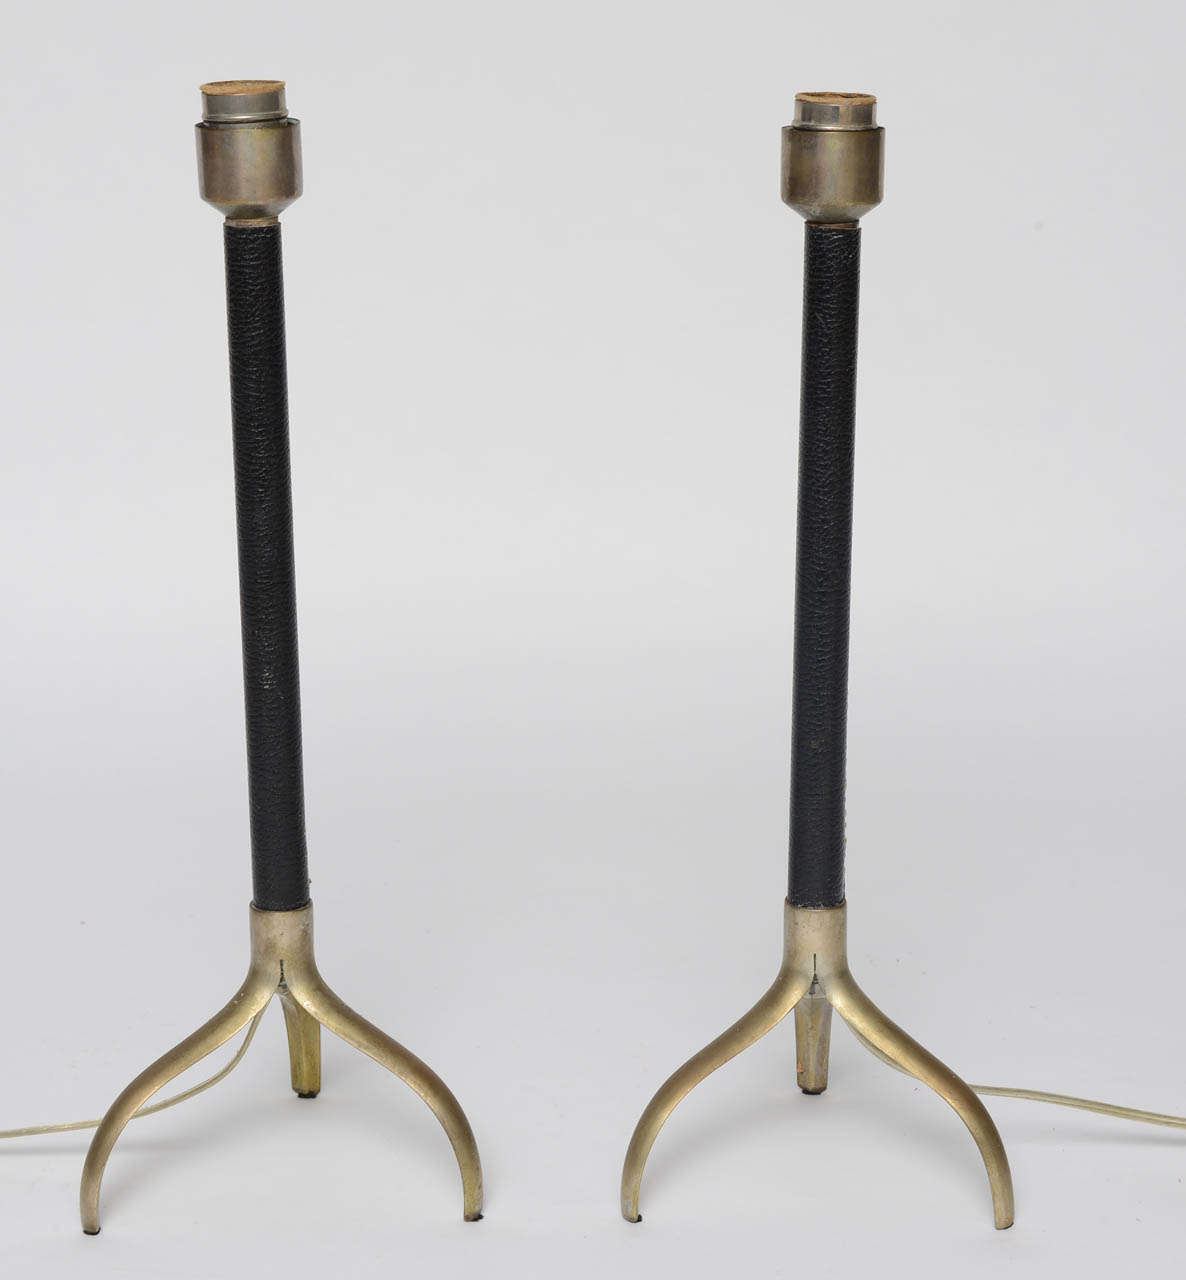 Pair of Stitched Leather Adnet Lamps 1